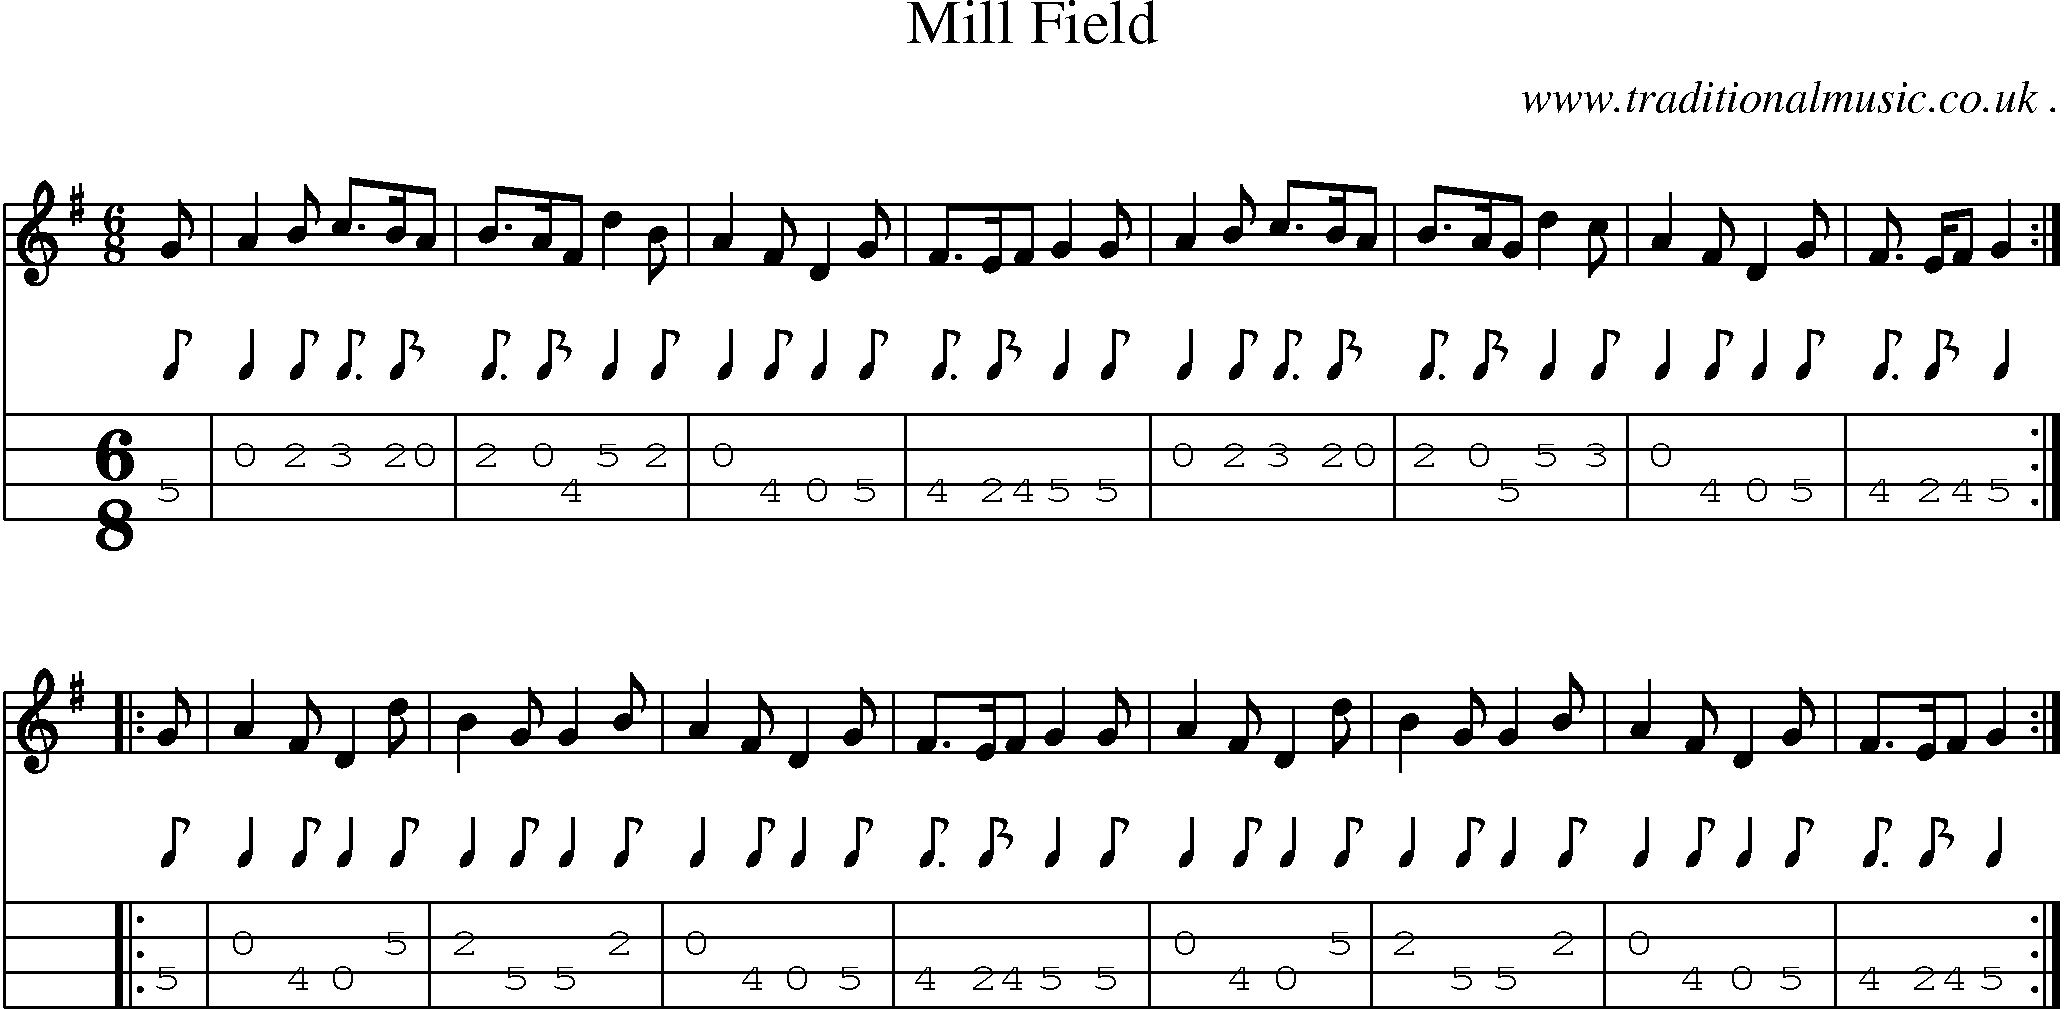 Sheet-Music and Mandolin Tabs for Mill Field